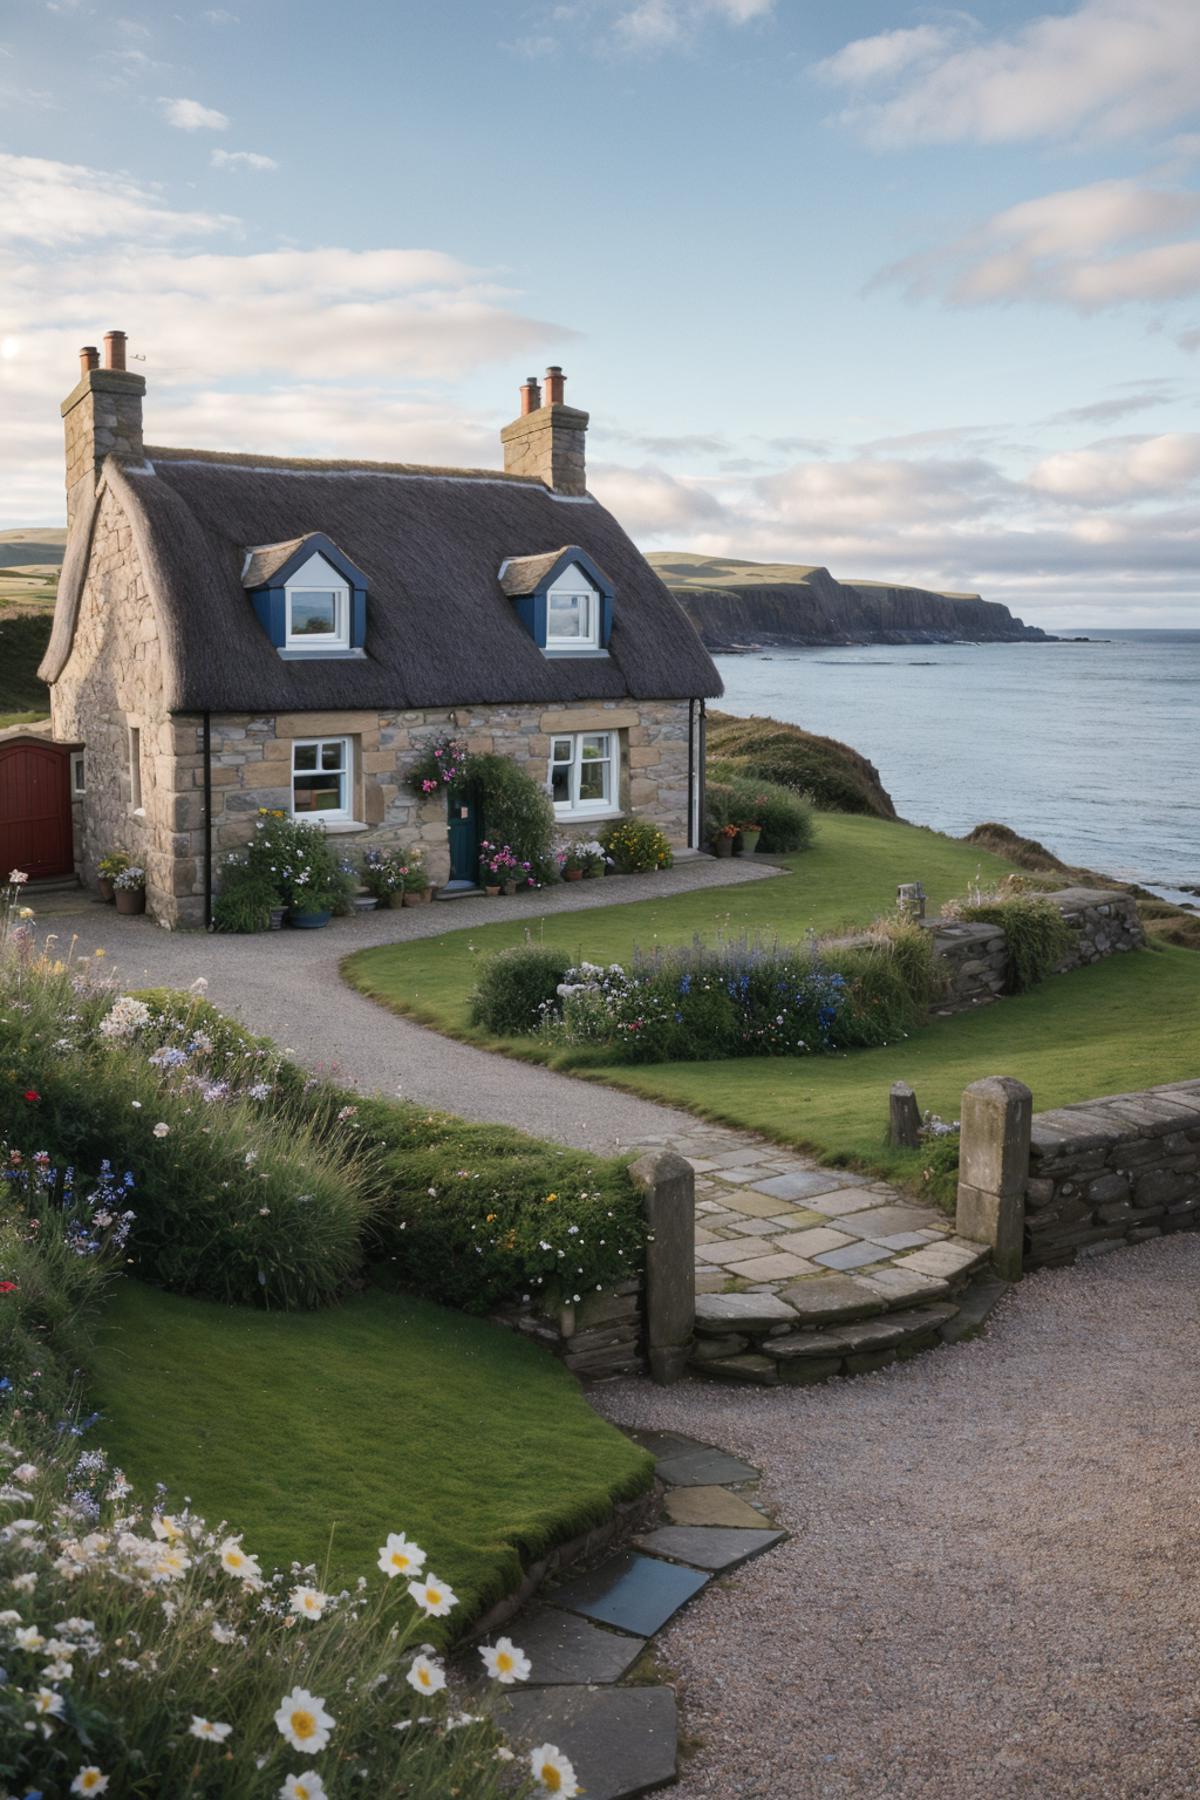 A charming, old stone house with a thatched roof sits on a hillside overlooking the ocean.